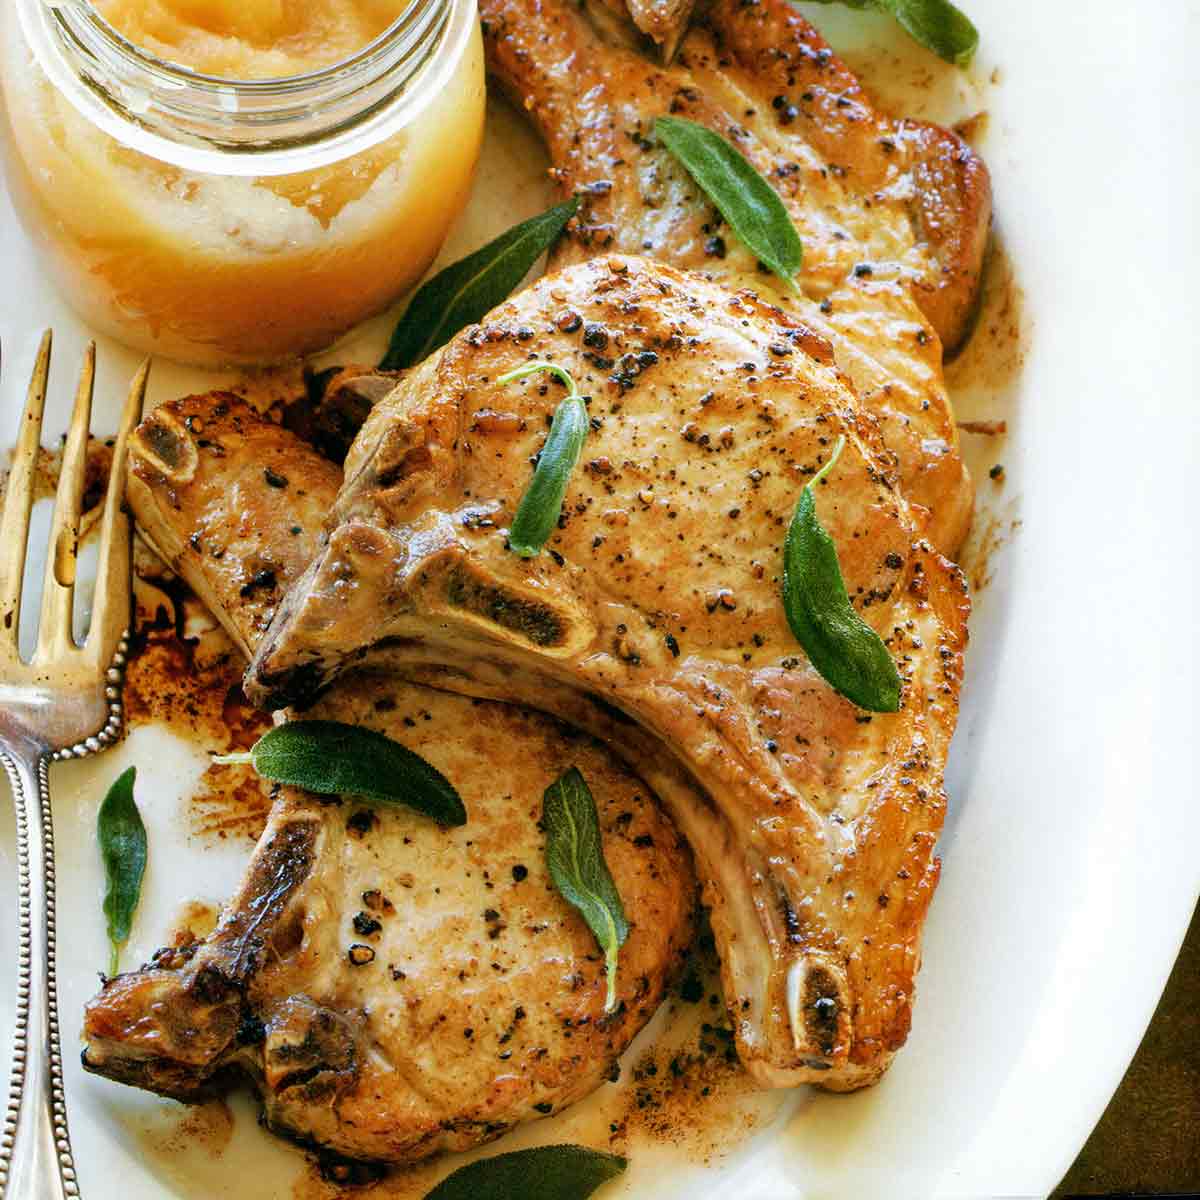 A white platter with four pork chops with applesauce in a jar on the side and fried sage leaves sprinkled over the pork chops.